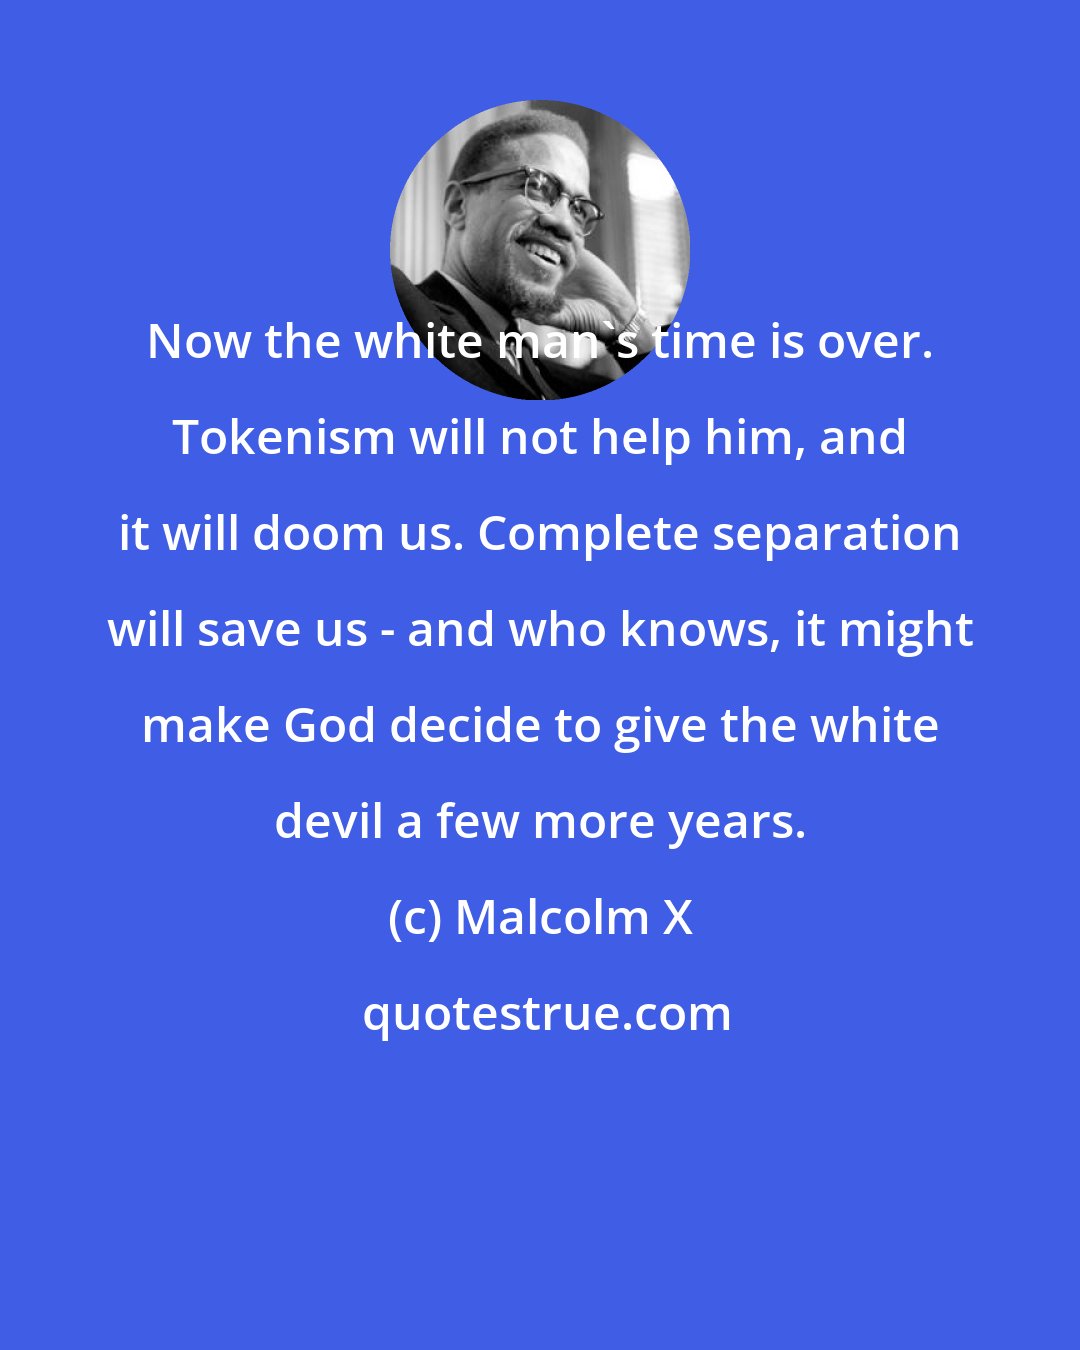 Malcolm X: Now the white man's time is over. Tokenism will not help him, and it will doom us. Complete separation will save us - and who knows, it might make God decide to give the white devil a few more years.